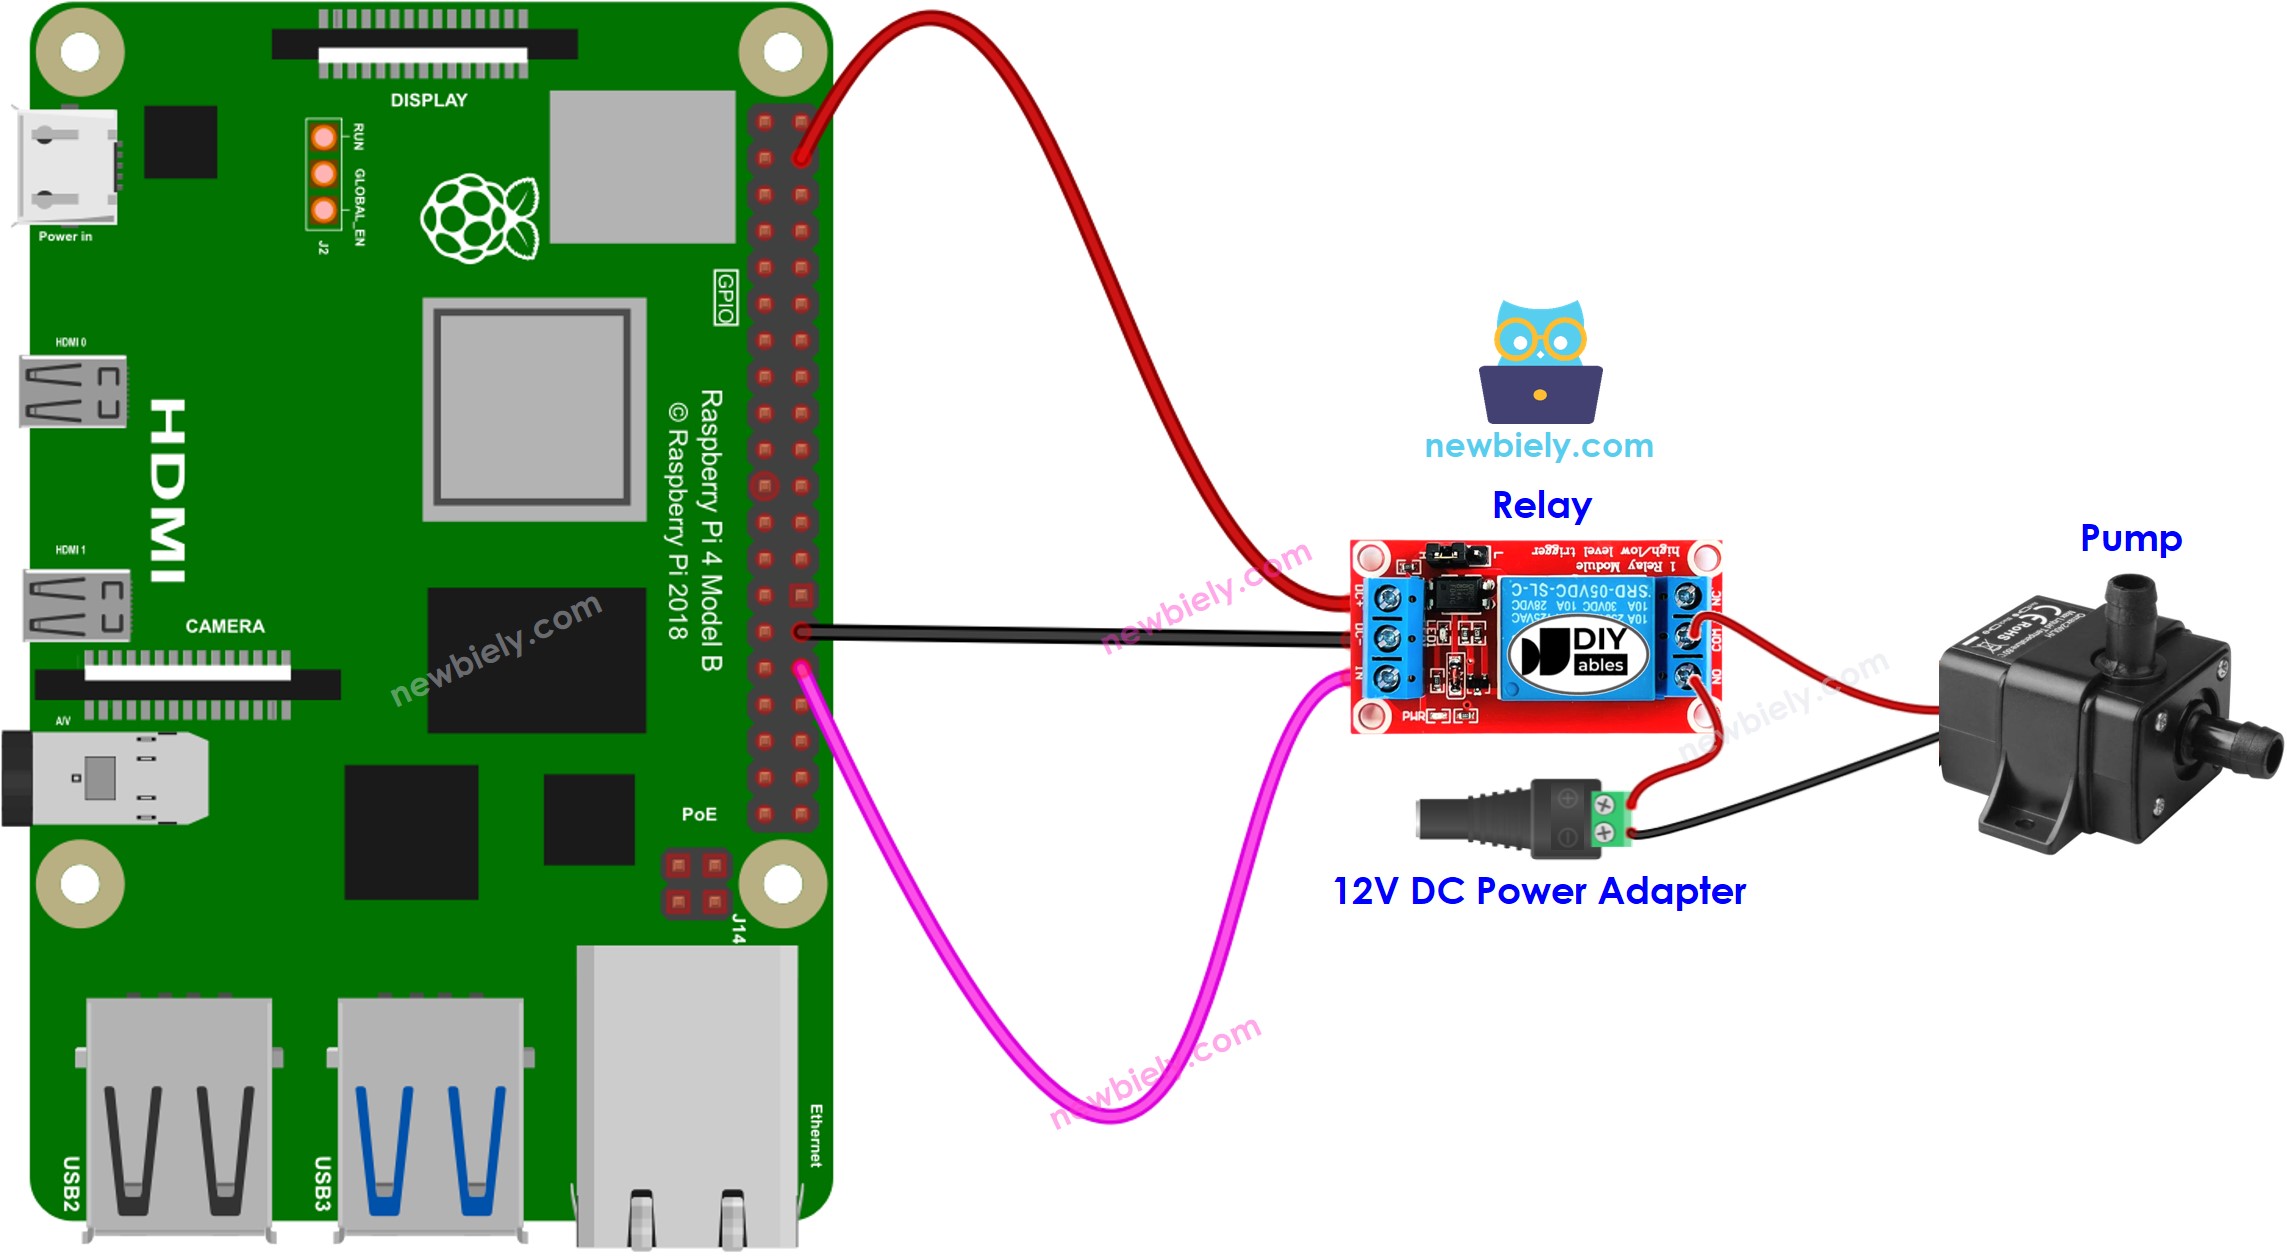 The wiring diagram between Raspberry Pi and Pump